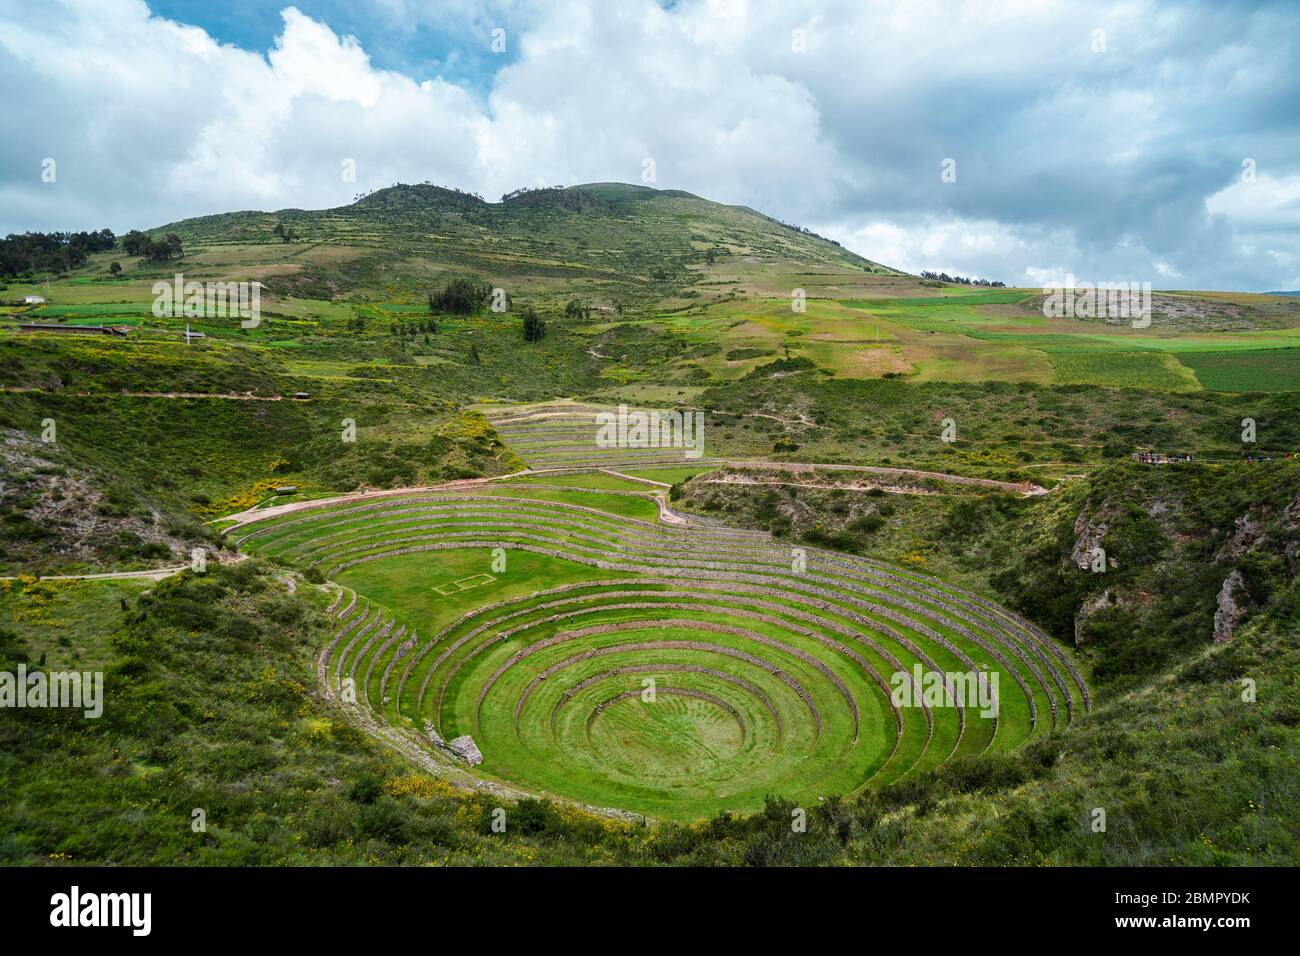 Circular Inca terraces of Moray, an archaeological site in the Sacred Valley, Cusco Region, Peru, South America. Stock Photo